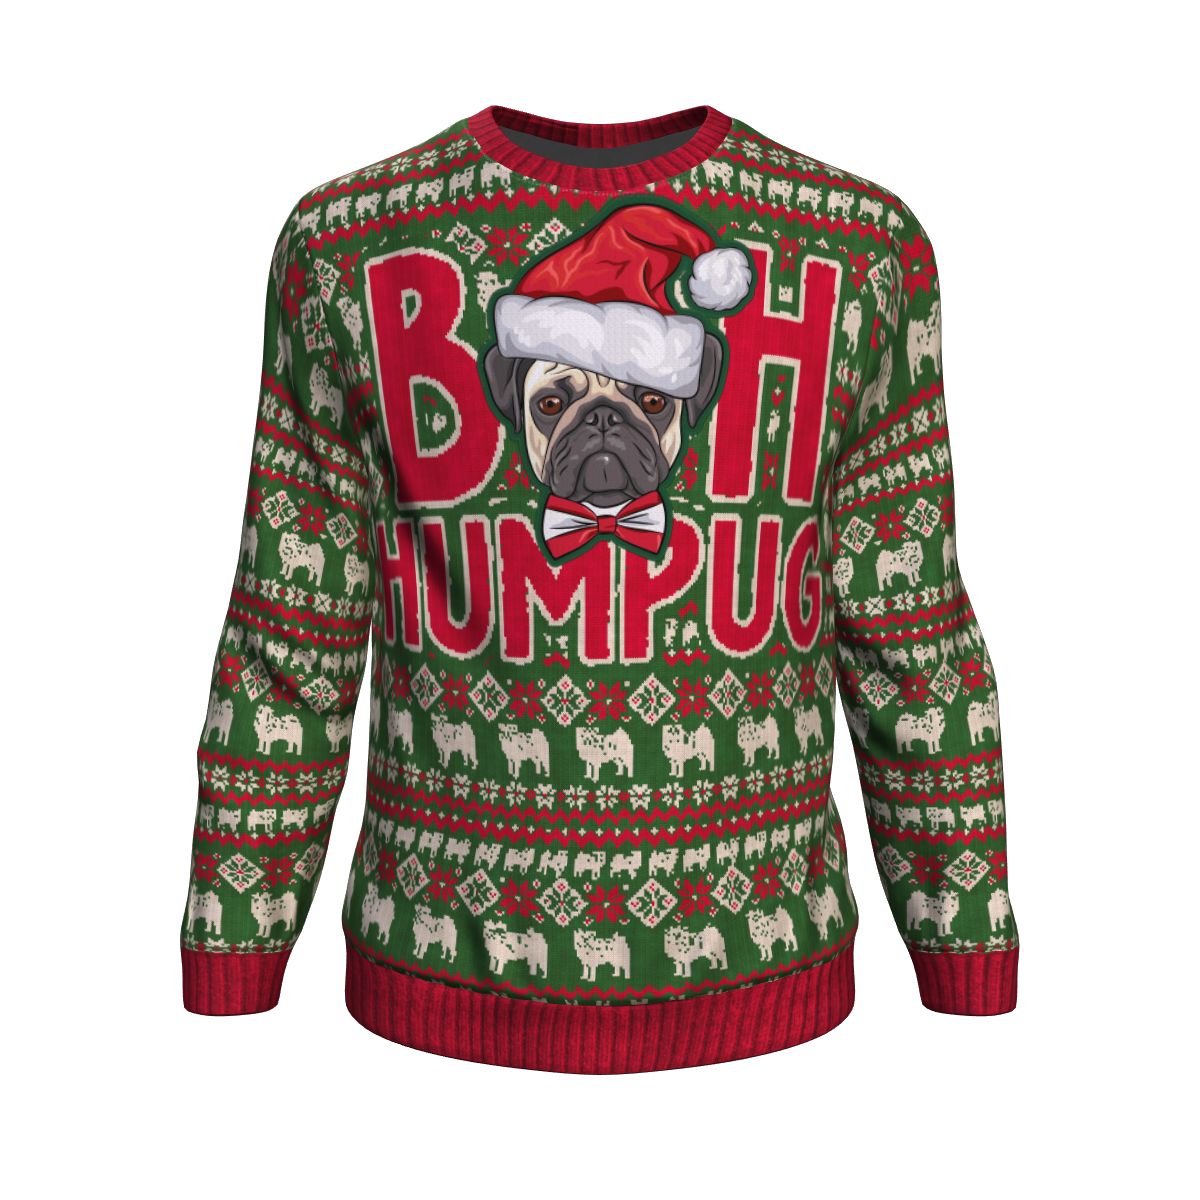 Bah Hum Pug Ugly Christmas Sweater-red/green/white - JaZazzy 